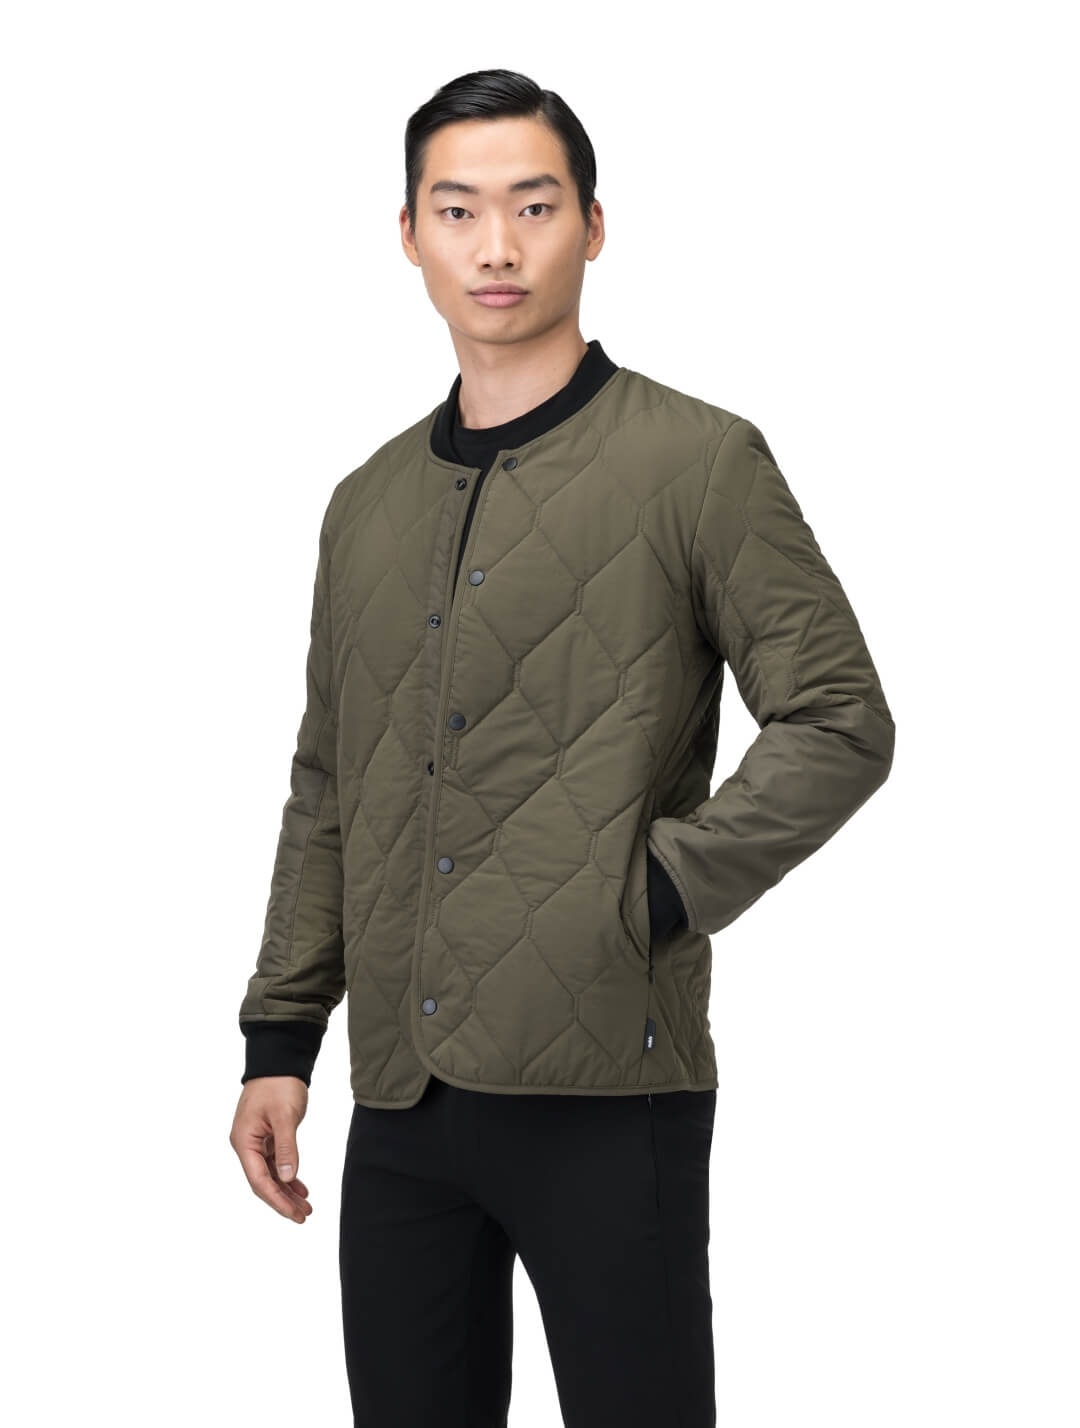 Speck Men's Tailored Mid Layer Jacket in hip length, Primaloft Gold Insulation Active+, diamond quilted body, rib knit collar and cuffs, snap buton front closure, and hidden side-entry zipper pockets at waist, in Fatigue